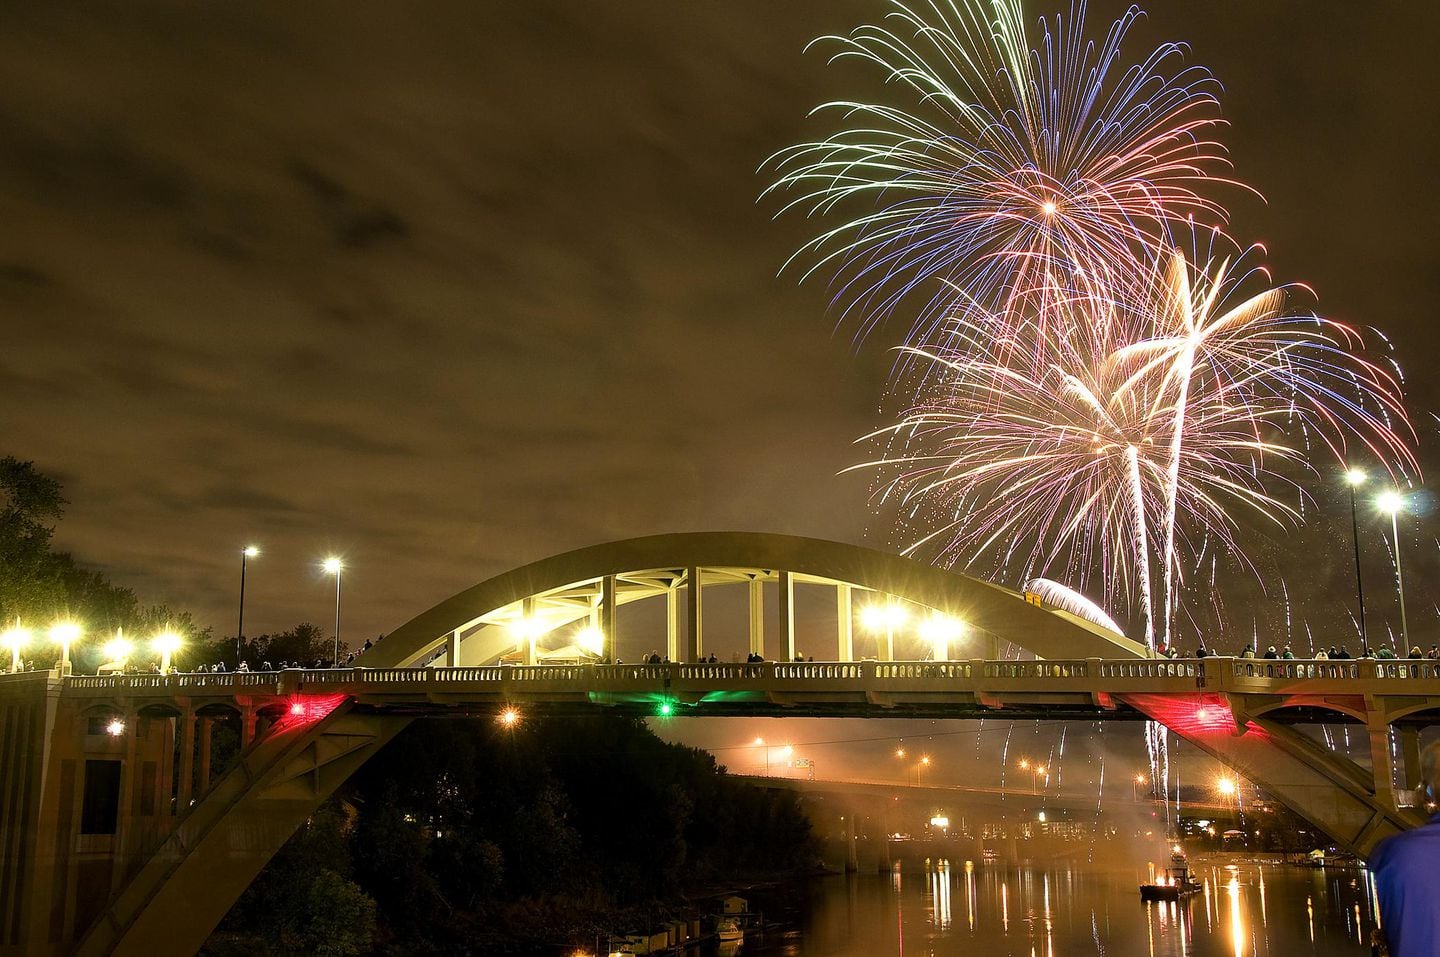 Where To See Fourth Of July Fireworks In The Northwest - OPB